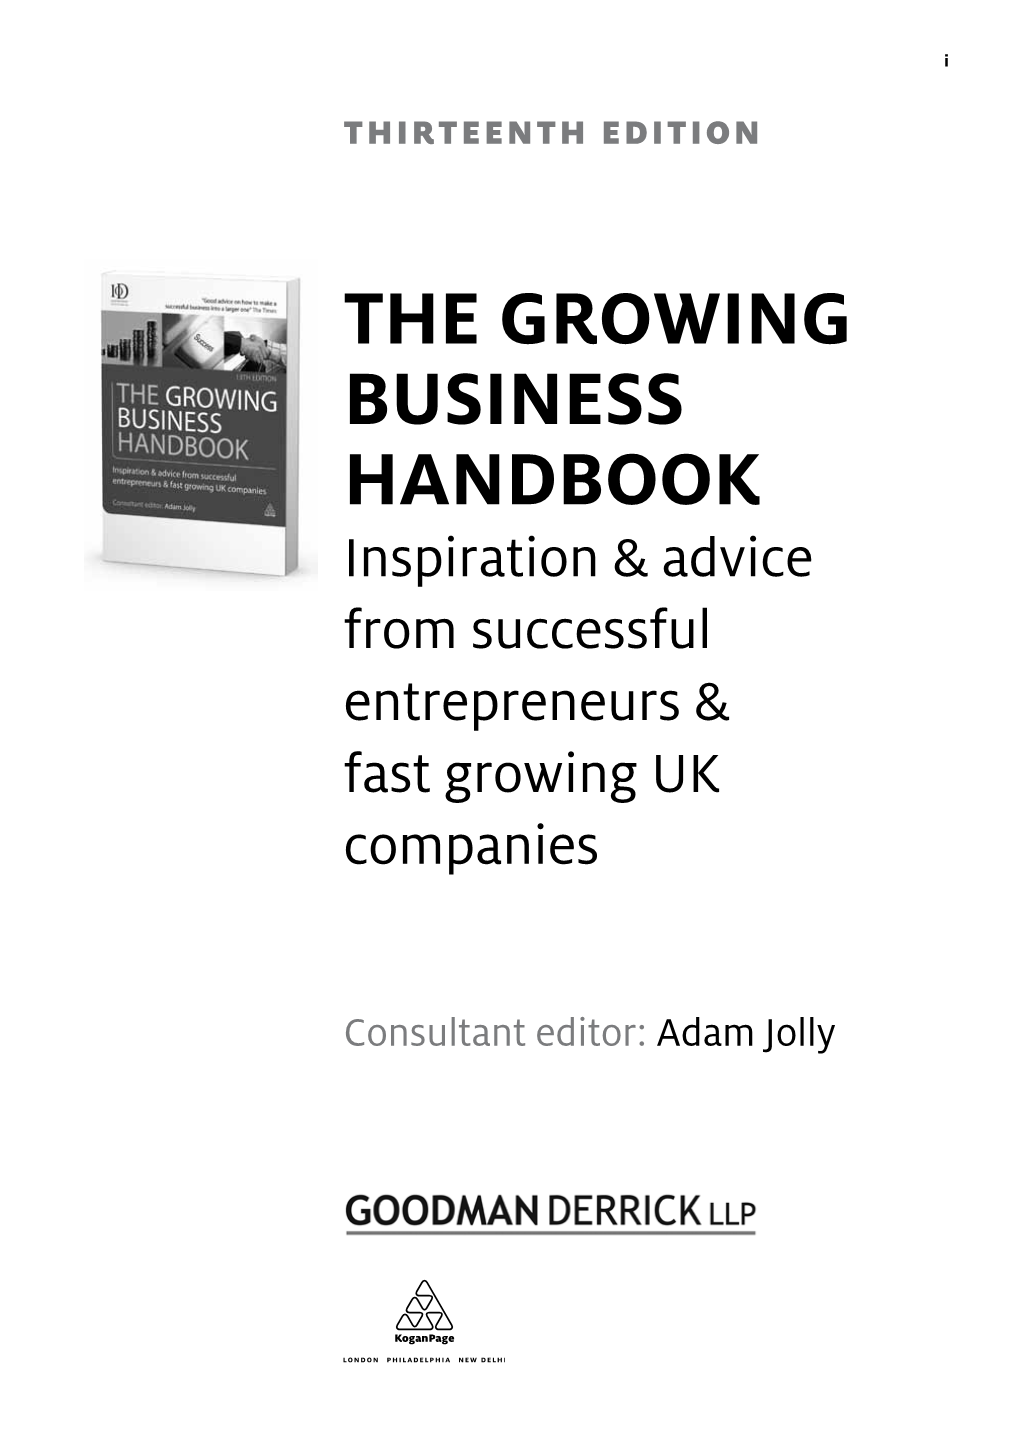 THE GROWING BUSINESS HANDBOOK Inspiration & Advice from Successful Entrepreneurs & Fast Growing UK Companies